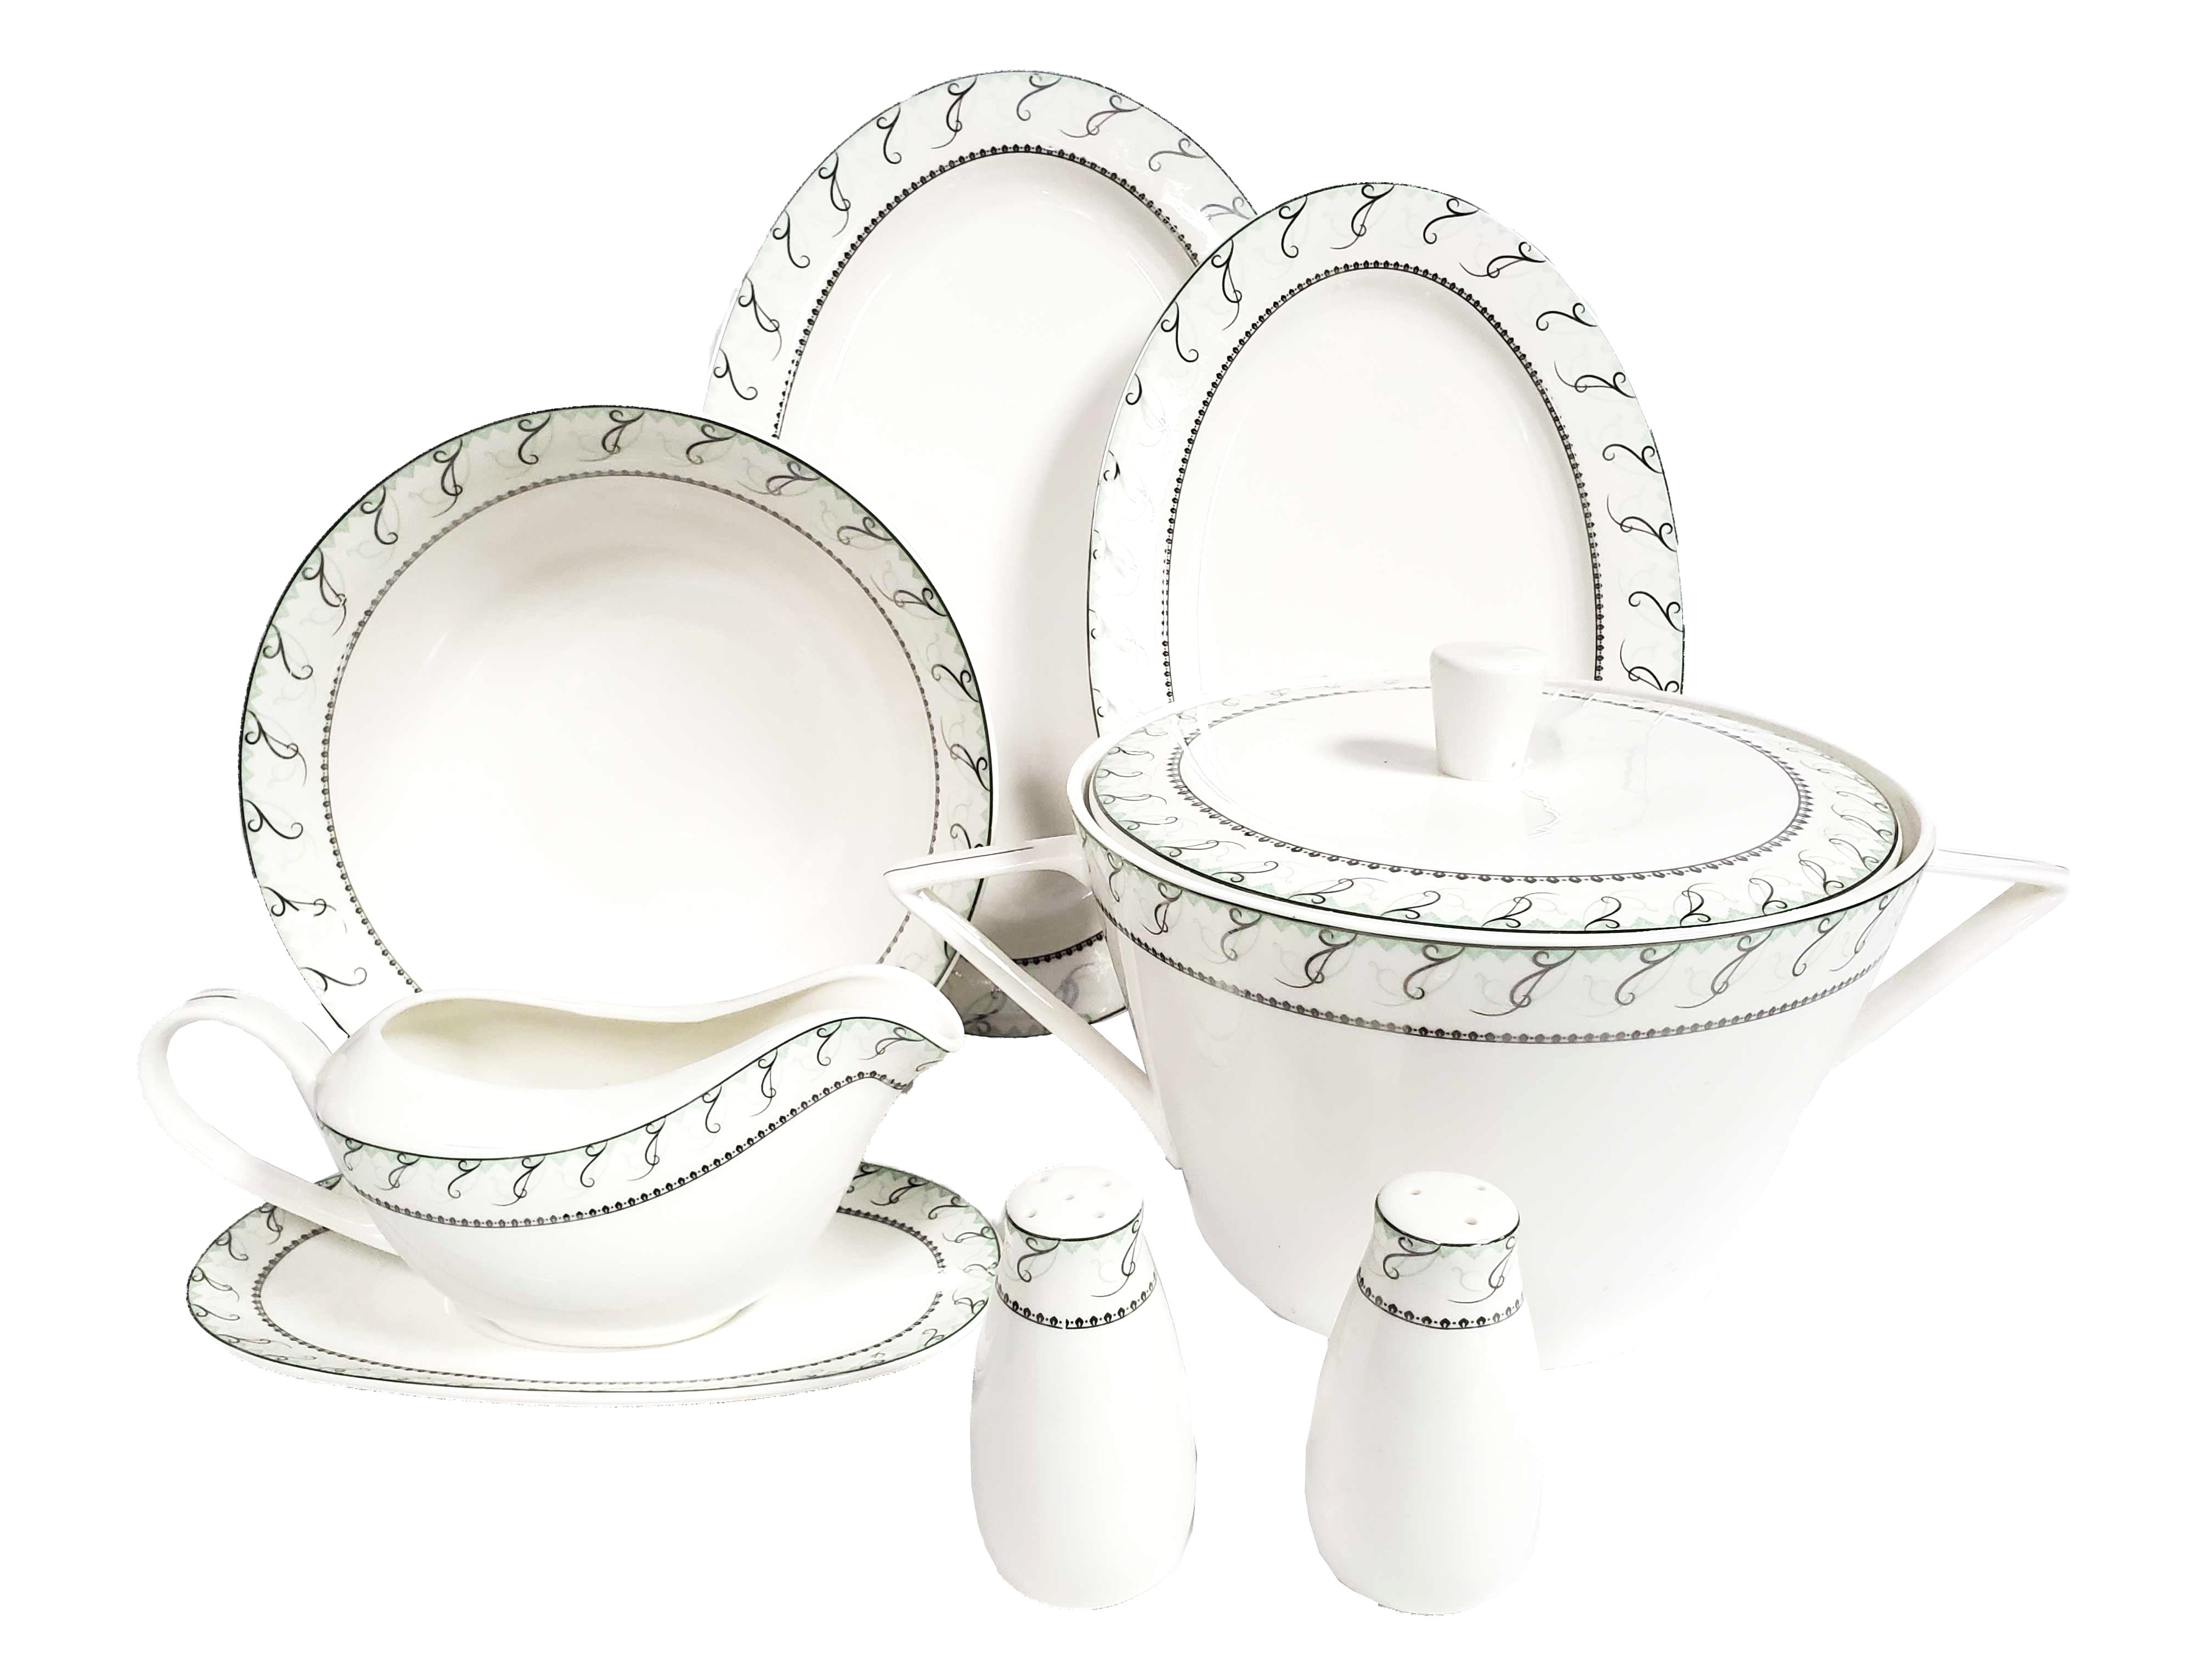 Dinnerware 86 Piece Set, Service for 12, include 14 Serving Pieces, Maria Platinum Collection by Success Bone China, Light weight, Extra white Body, Extra strong chip resistant